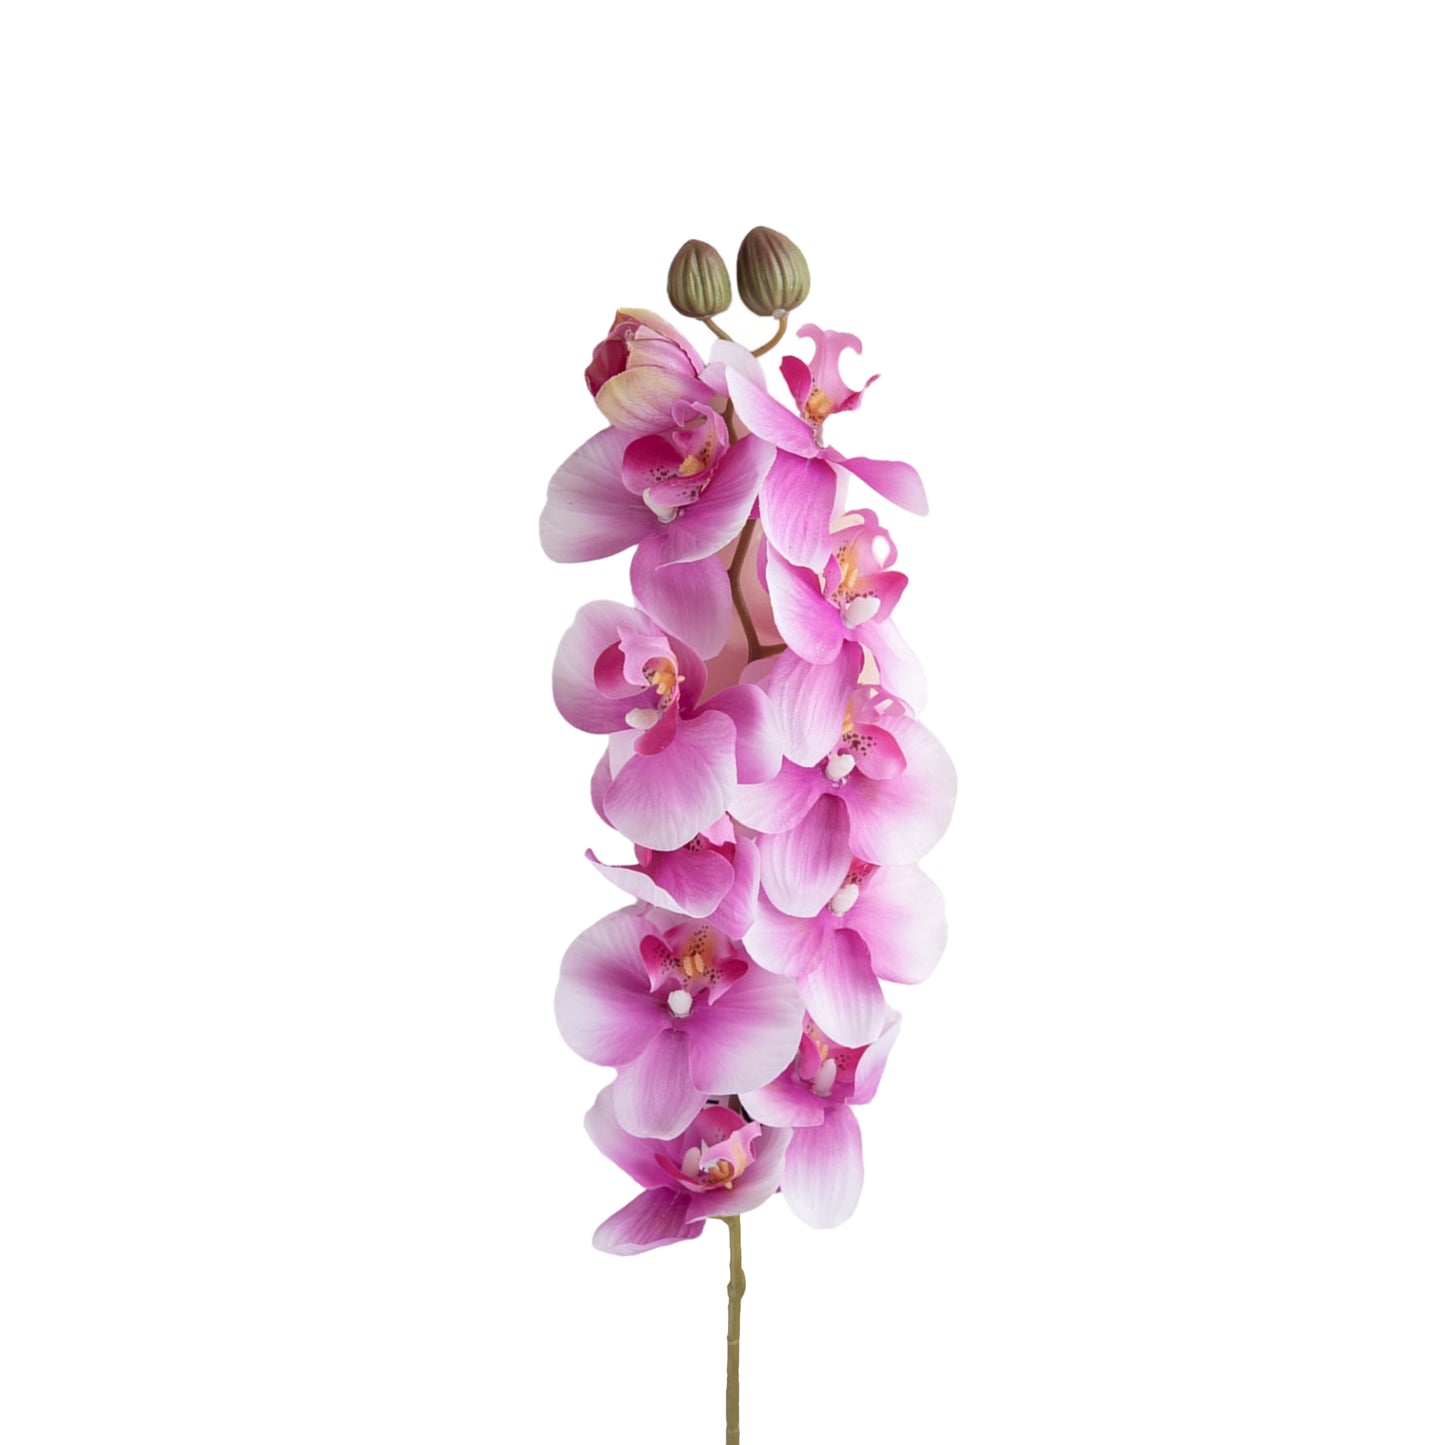 Set of 2 Artificial Phalaenopsis Orchid Stems, 28 inches